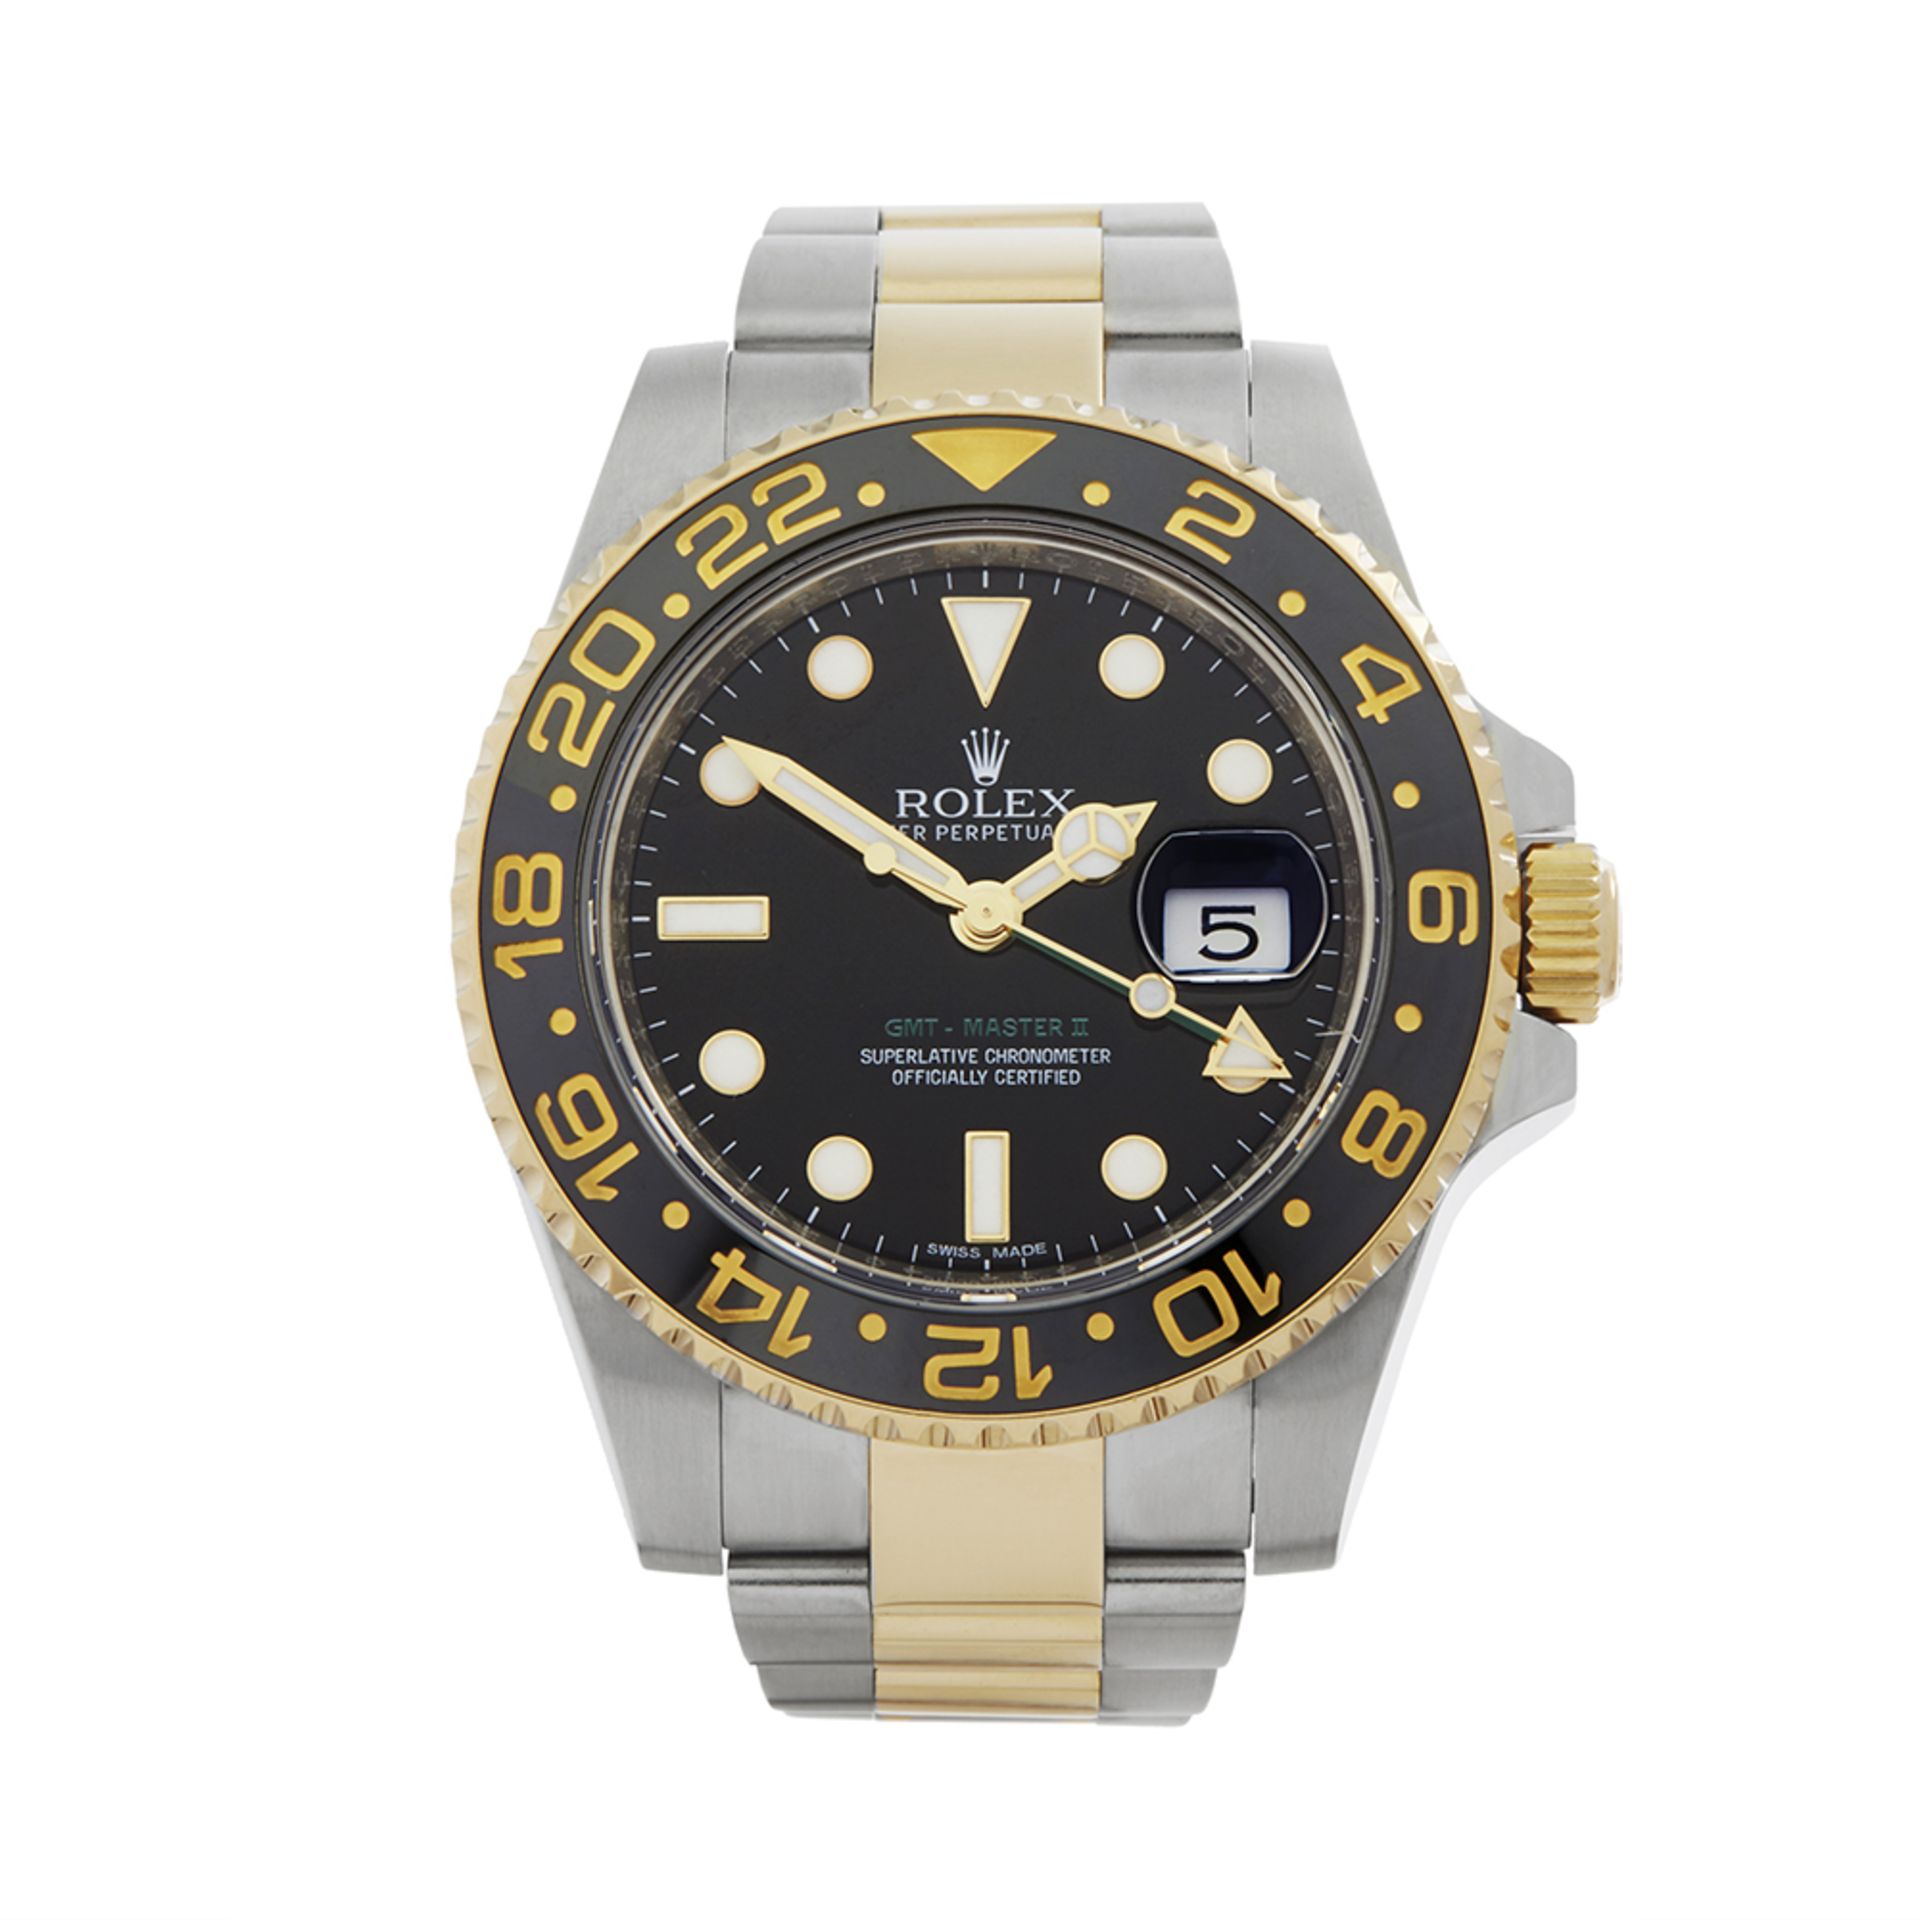 Rolex GMT-Master II Stainless Steel & 18K Yellow Gold - 116713 - Image 2 of 8